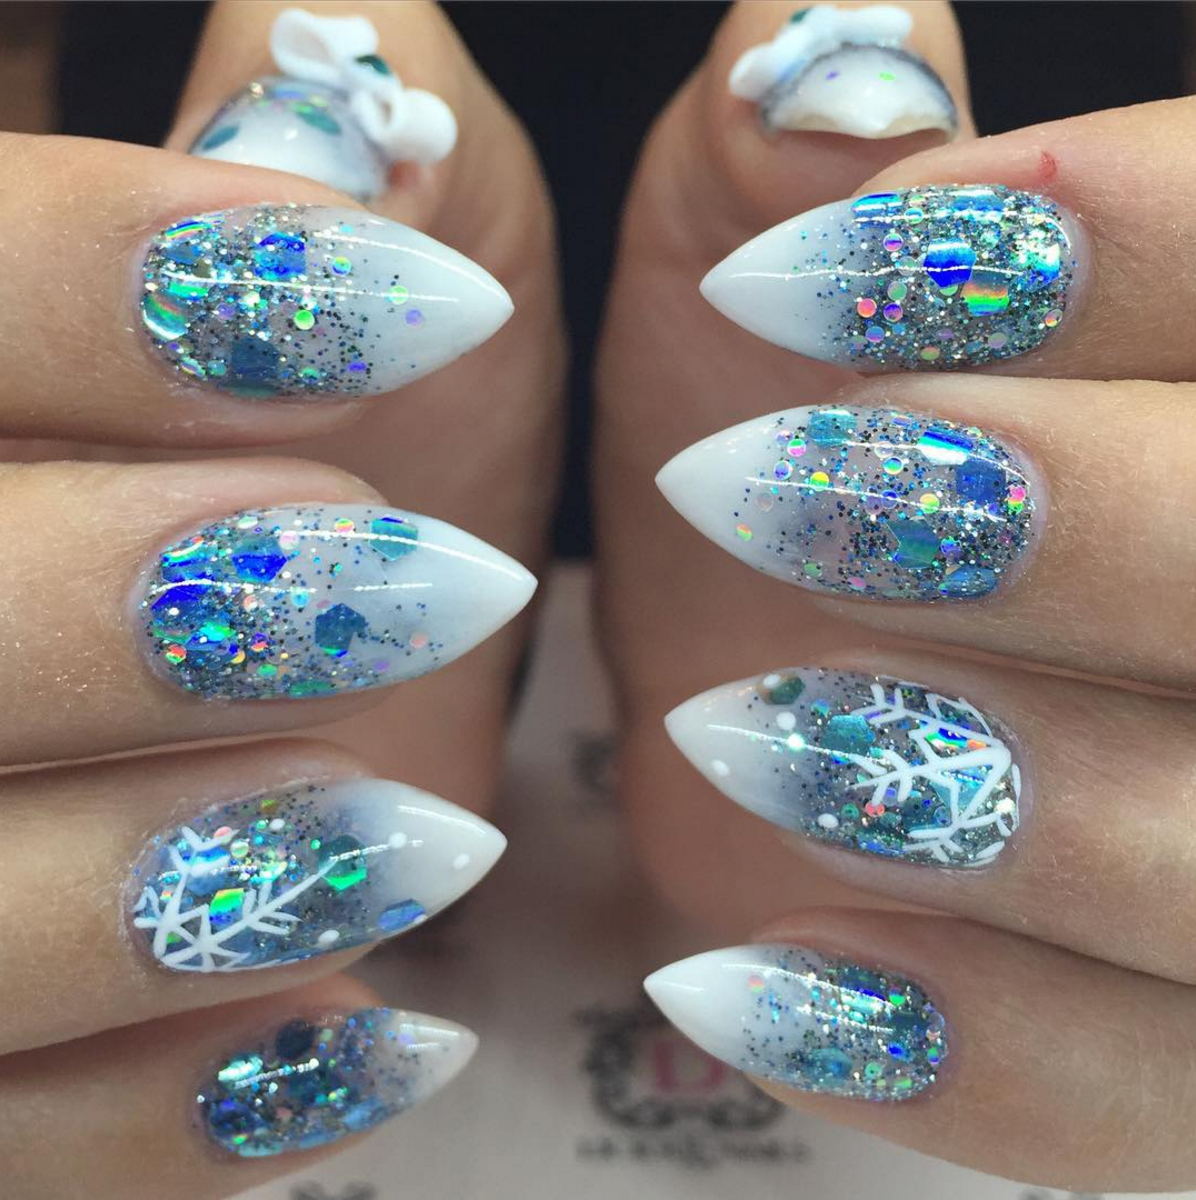 The Icicle Nails Trend Is Taking Over Instagram Sheknows